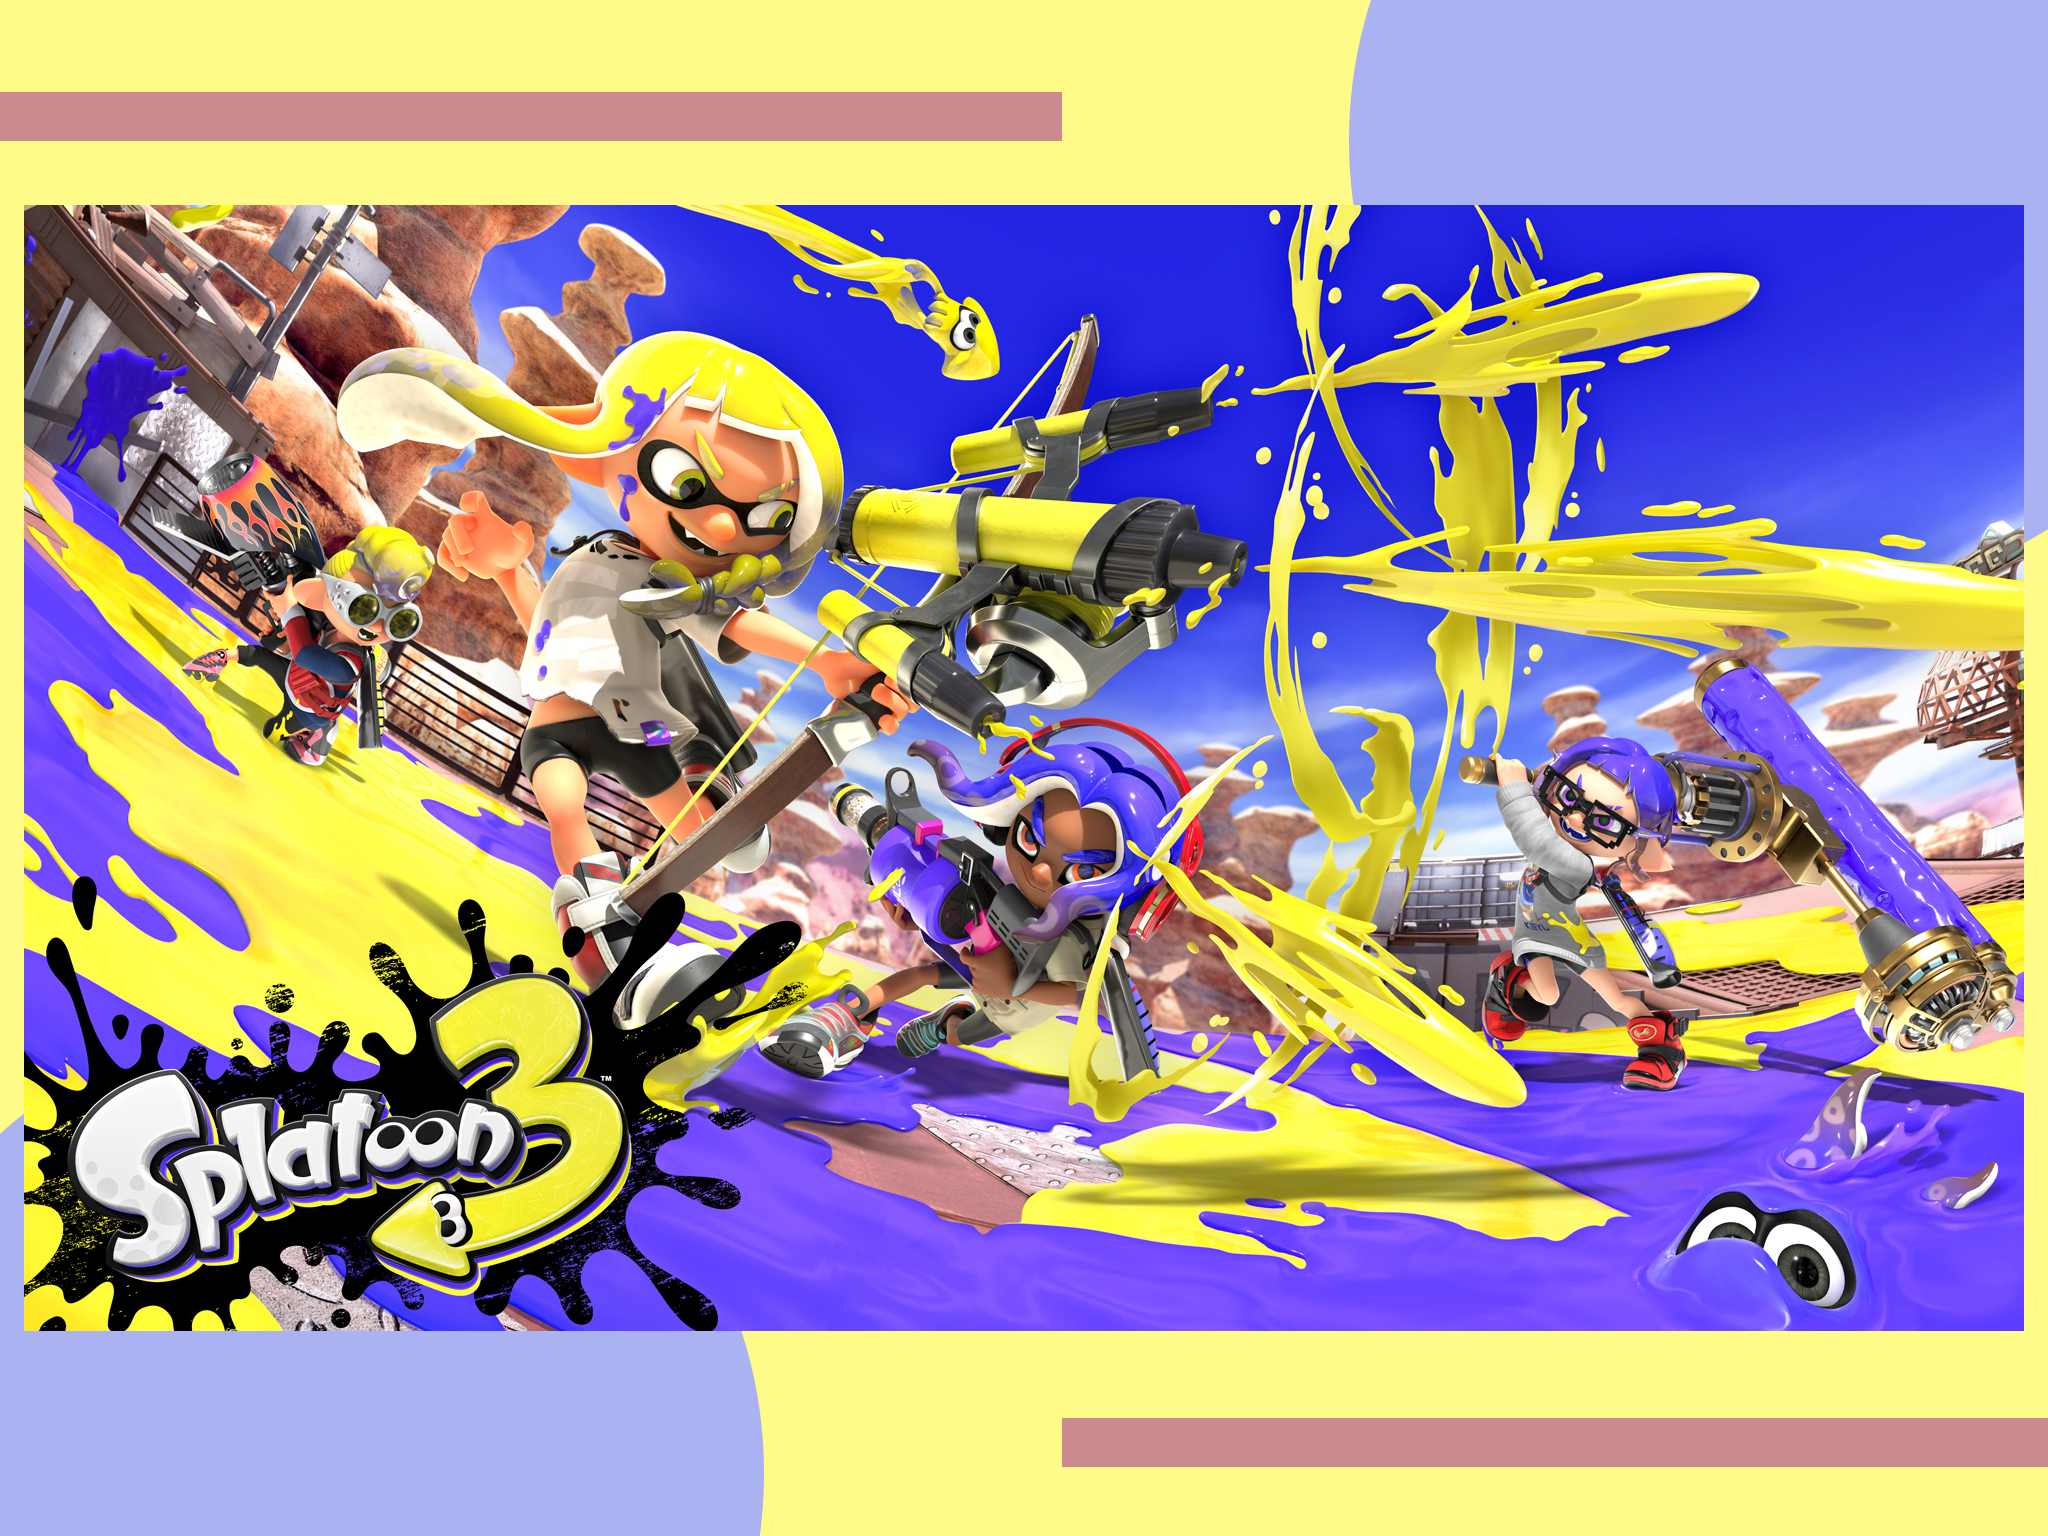 After teasing its release last year, Splatoon 3 is finally scheduled to come out in September 2022.